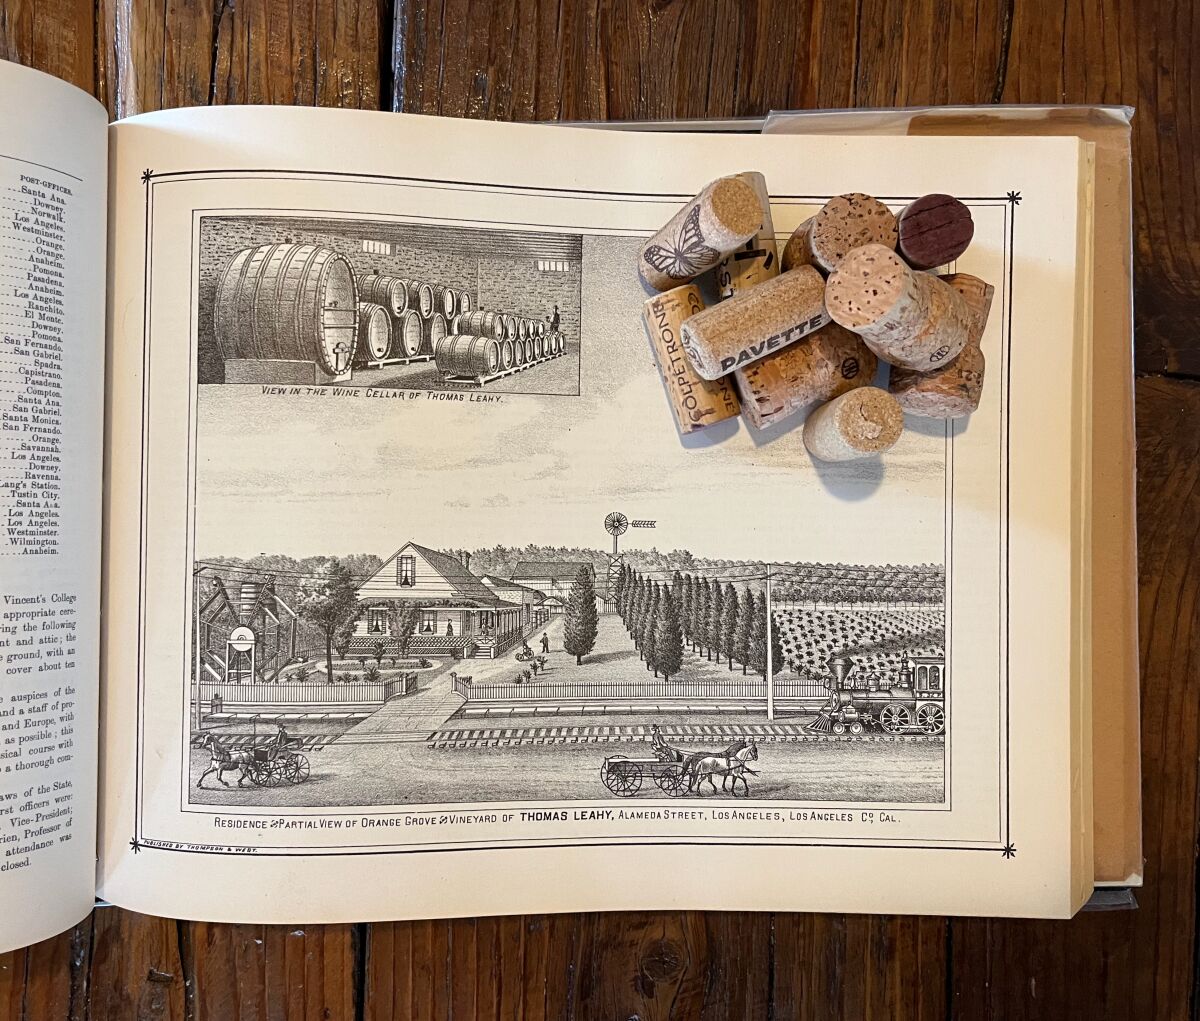 An open book shows black and white images of wine barrels and a farm, wine bottle corks are arranged on the page